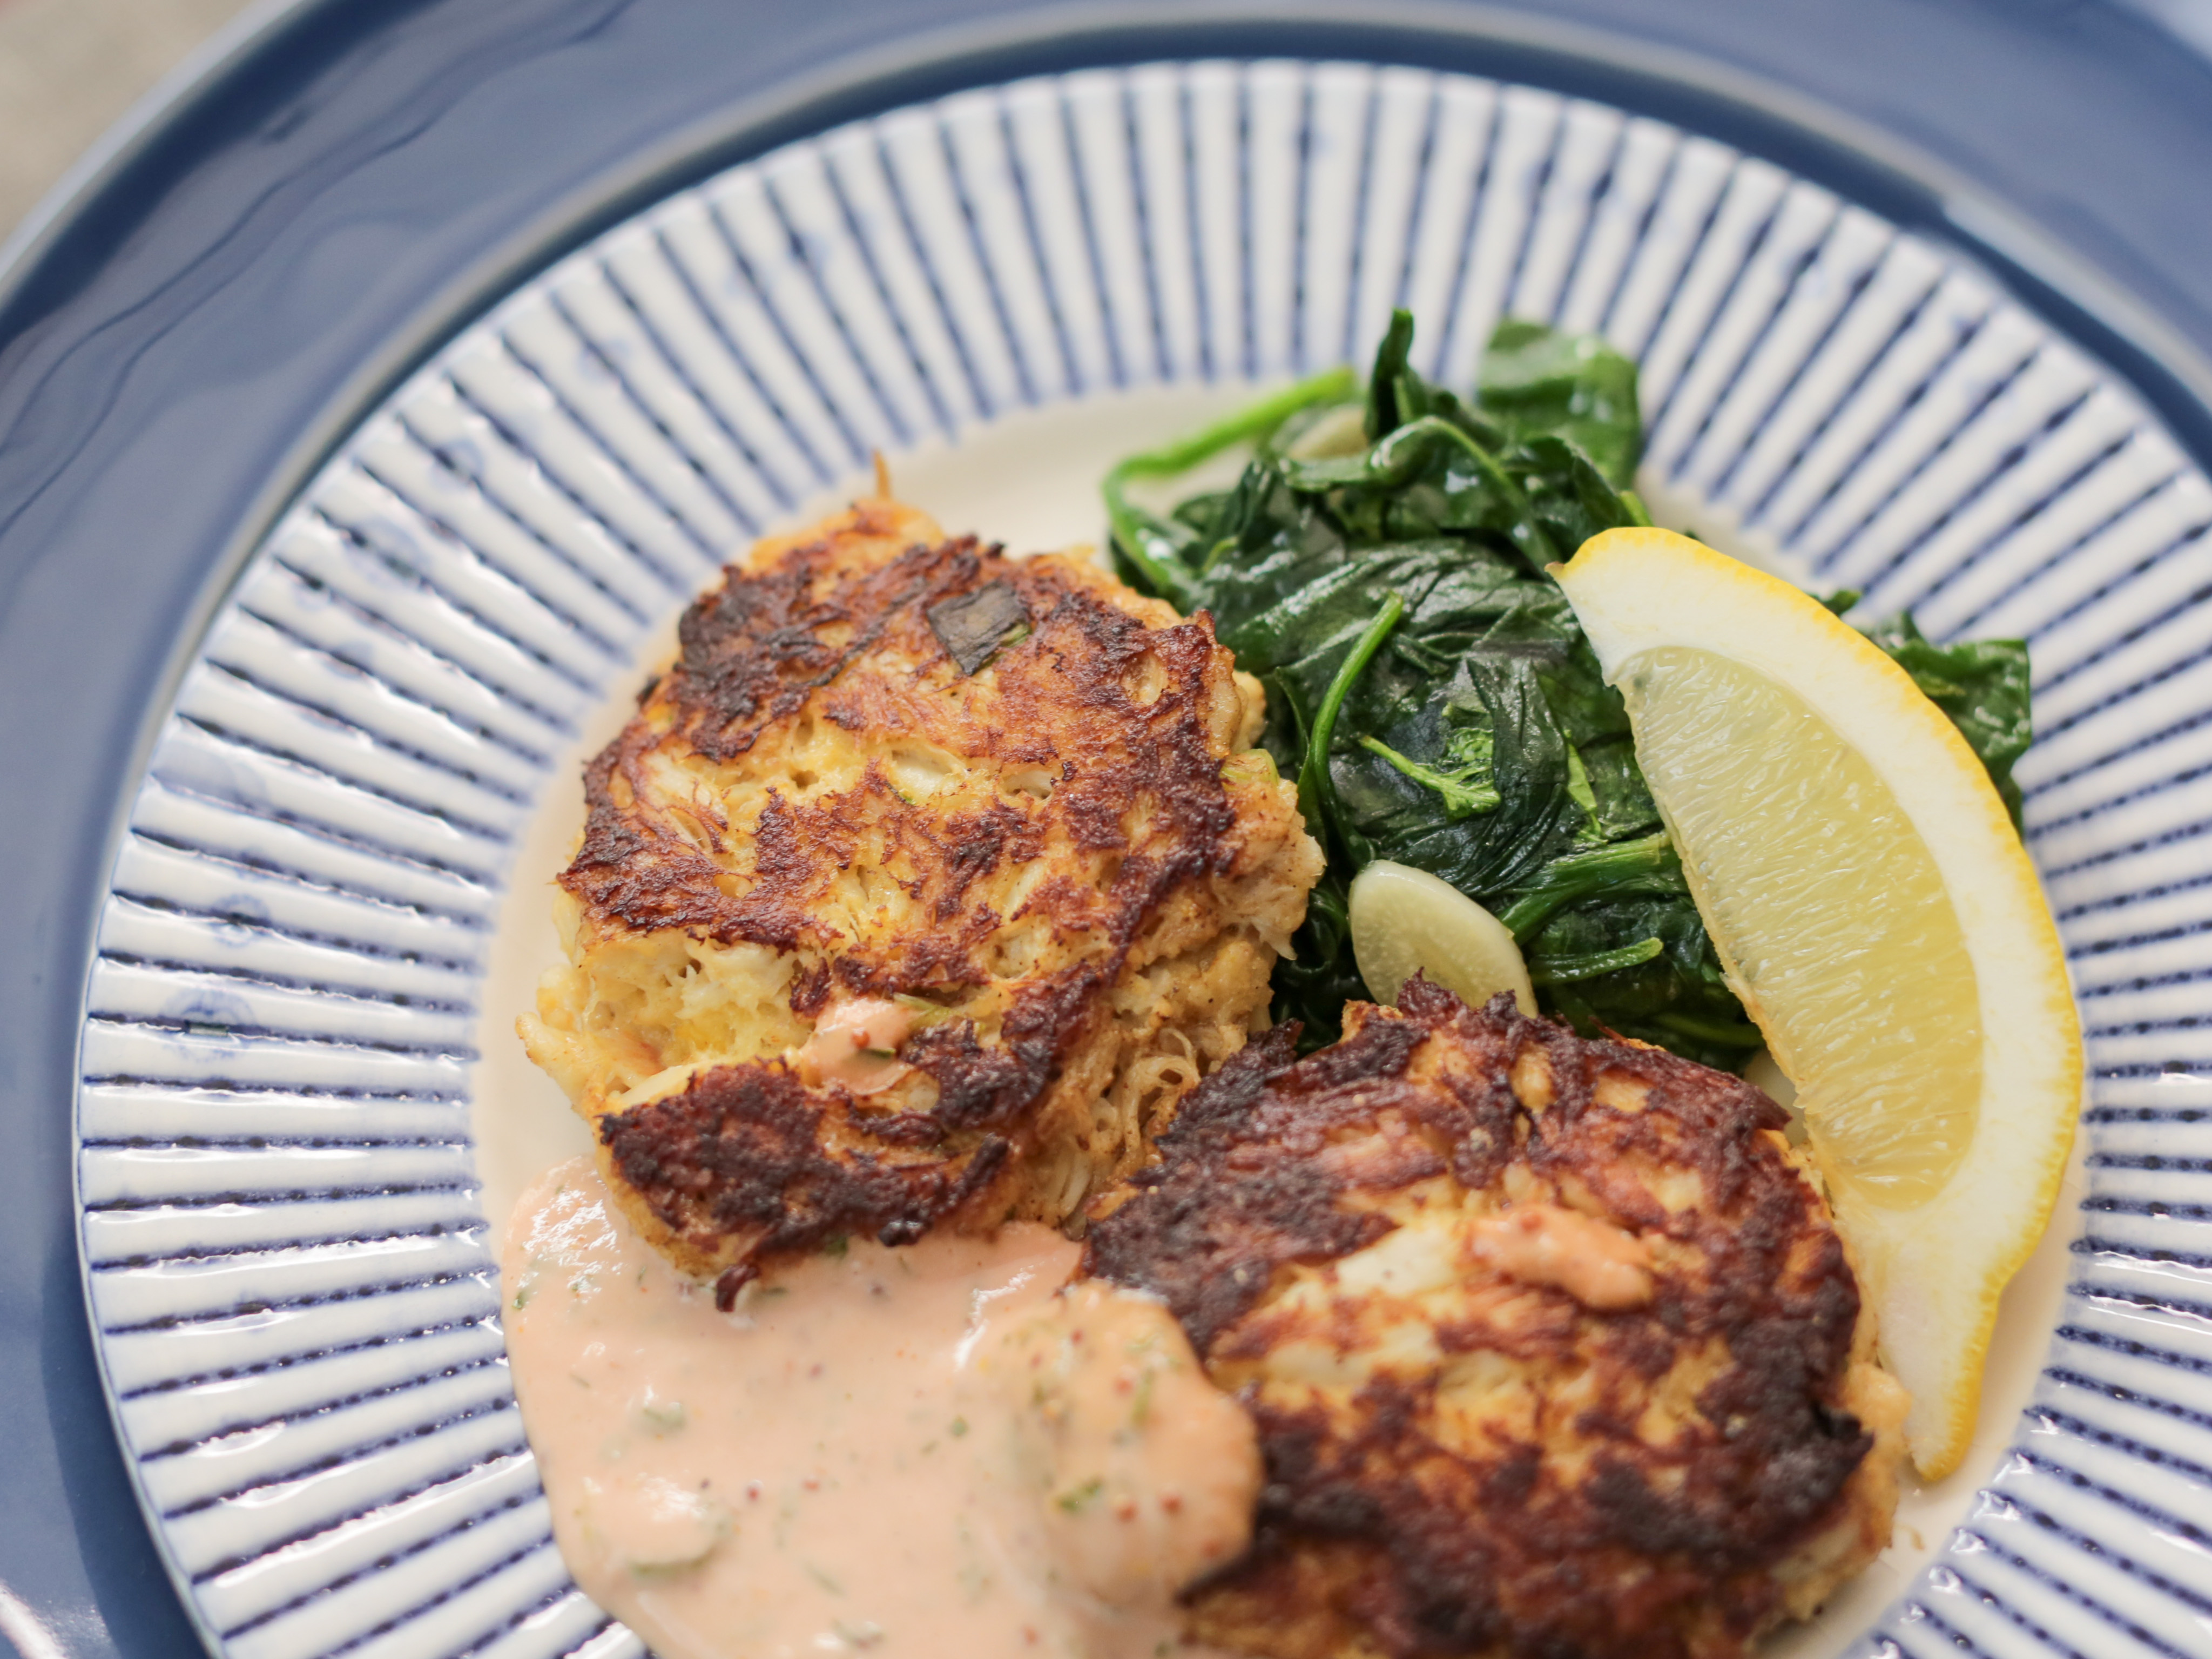 Lump Crab Cake Recipe - Cooking for Keeps